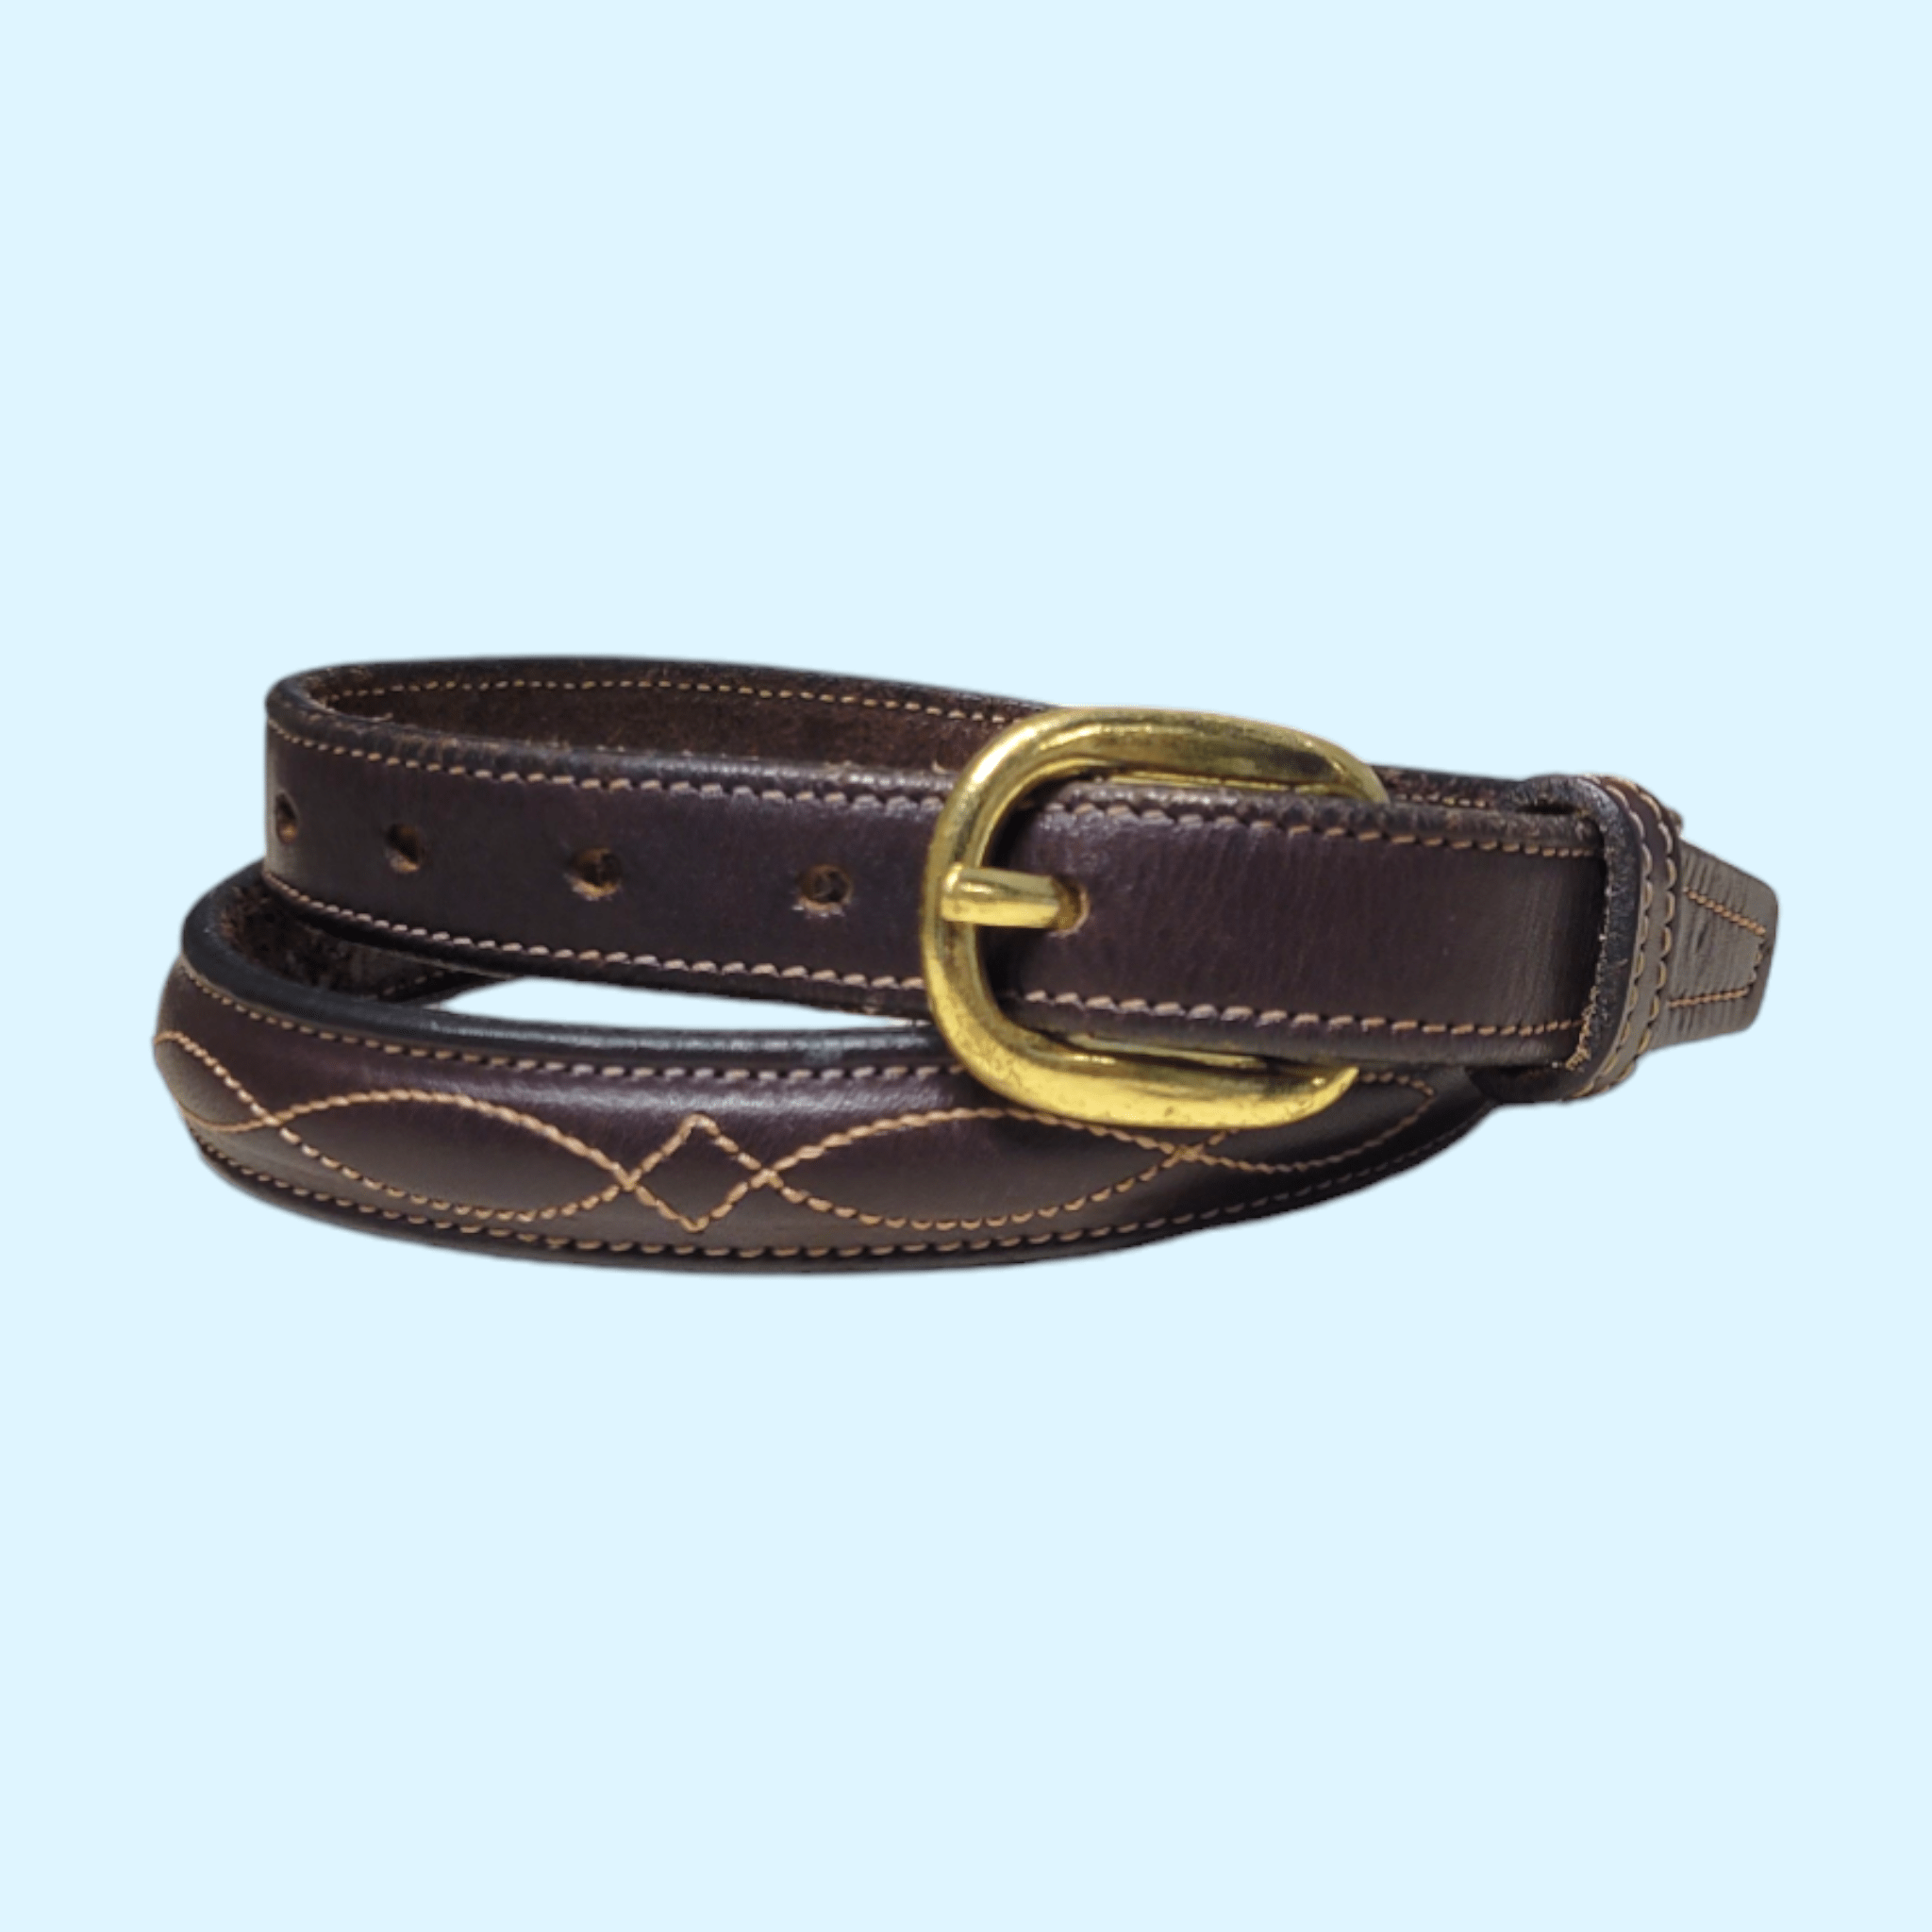 Tory Leather Raised Fancy Stitched Belt in Brown - 26" - Equine Exchange Tack Shop